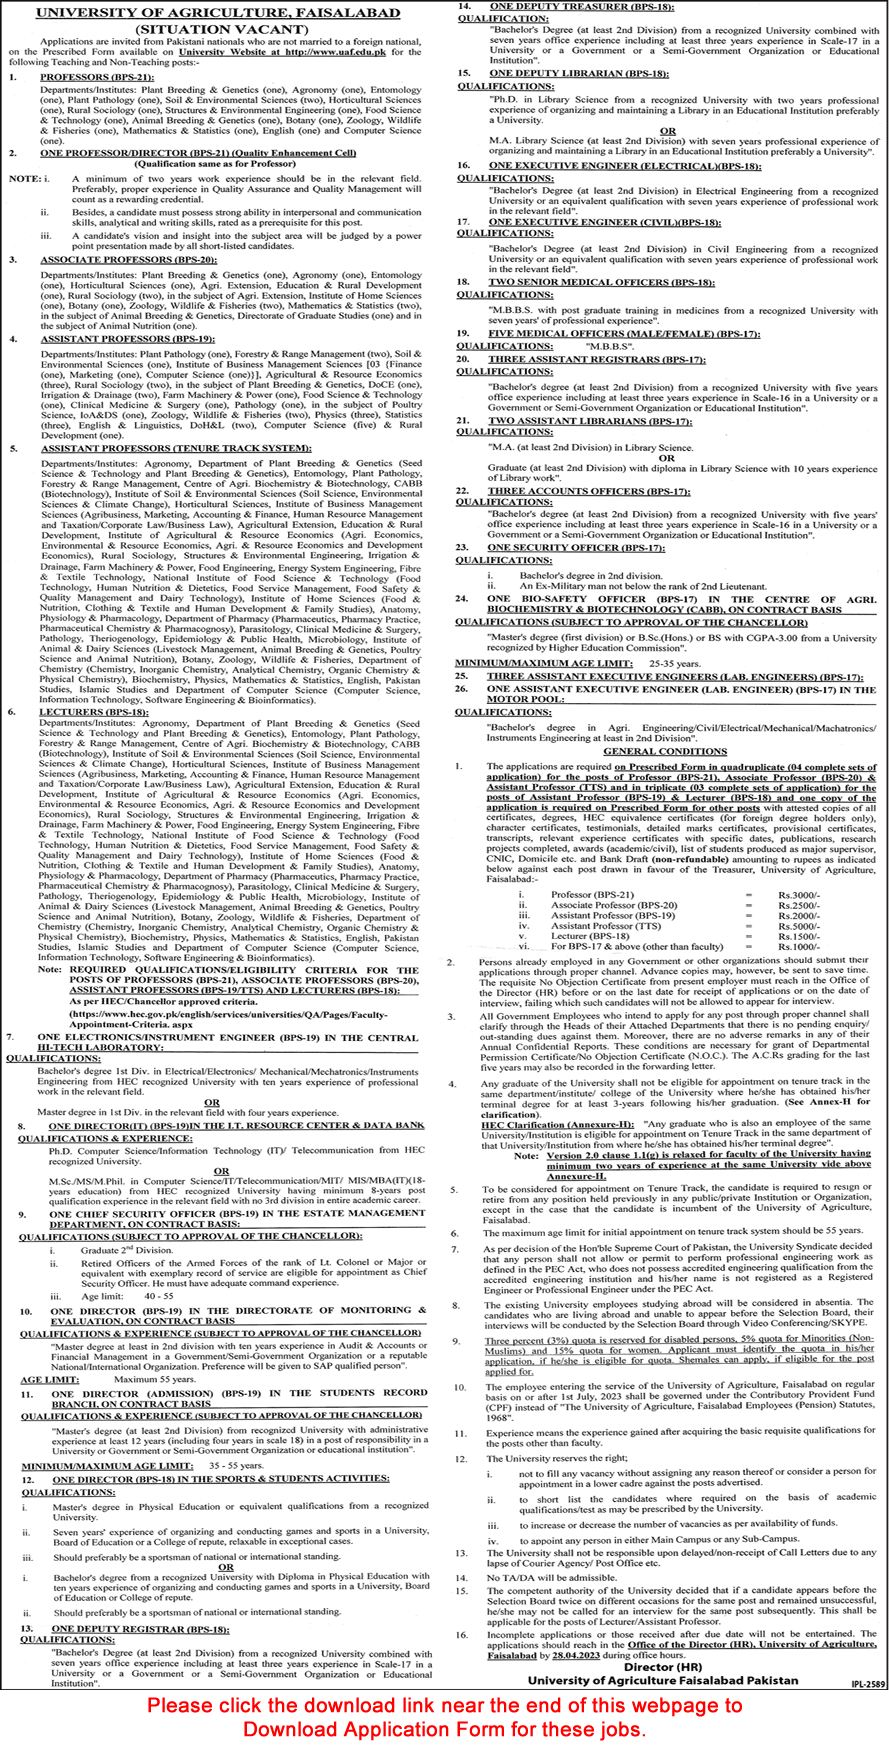 University of Agriculture Faisalabad Jobs April 2023 Application Form Teaching Faculty & Others Latest